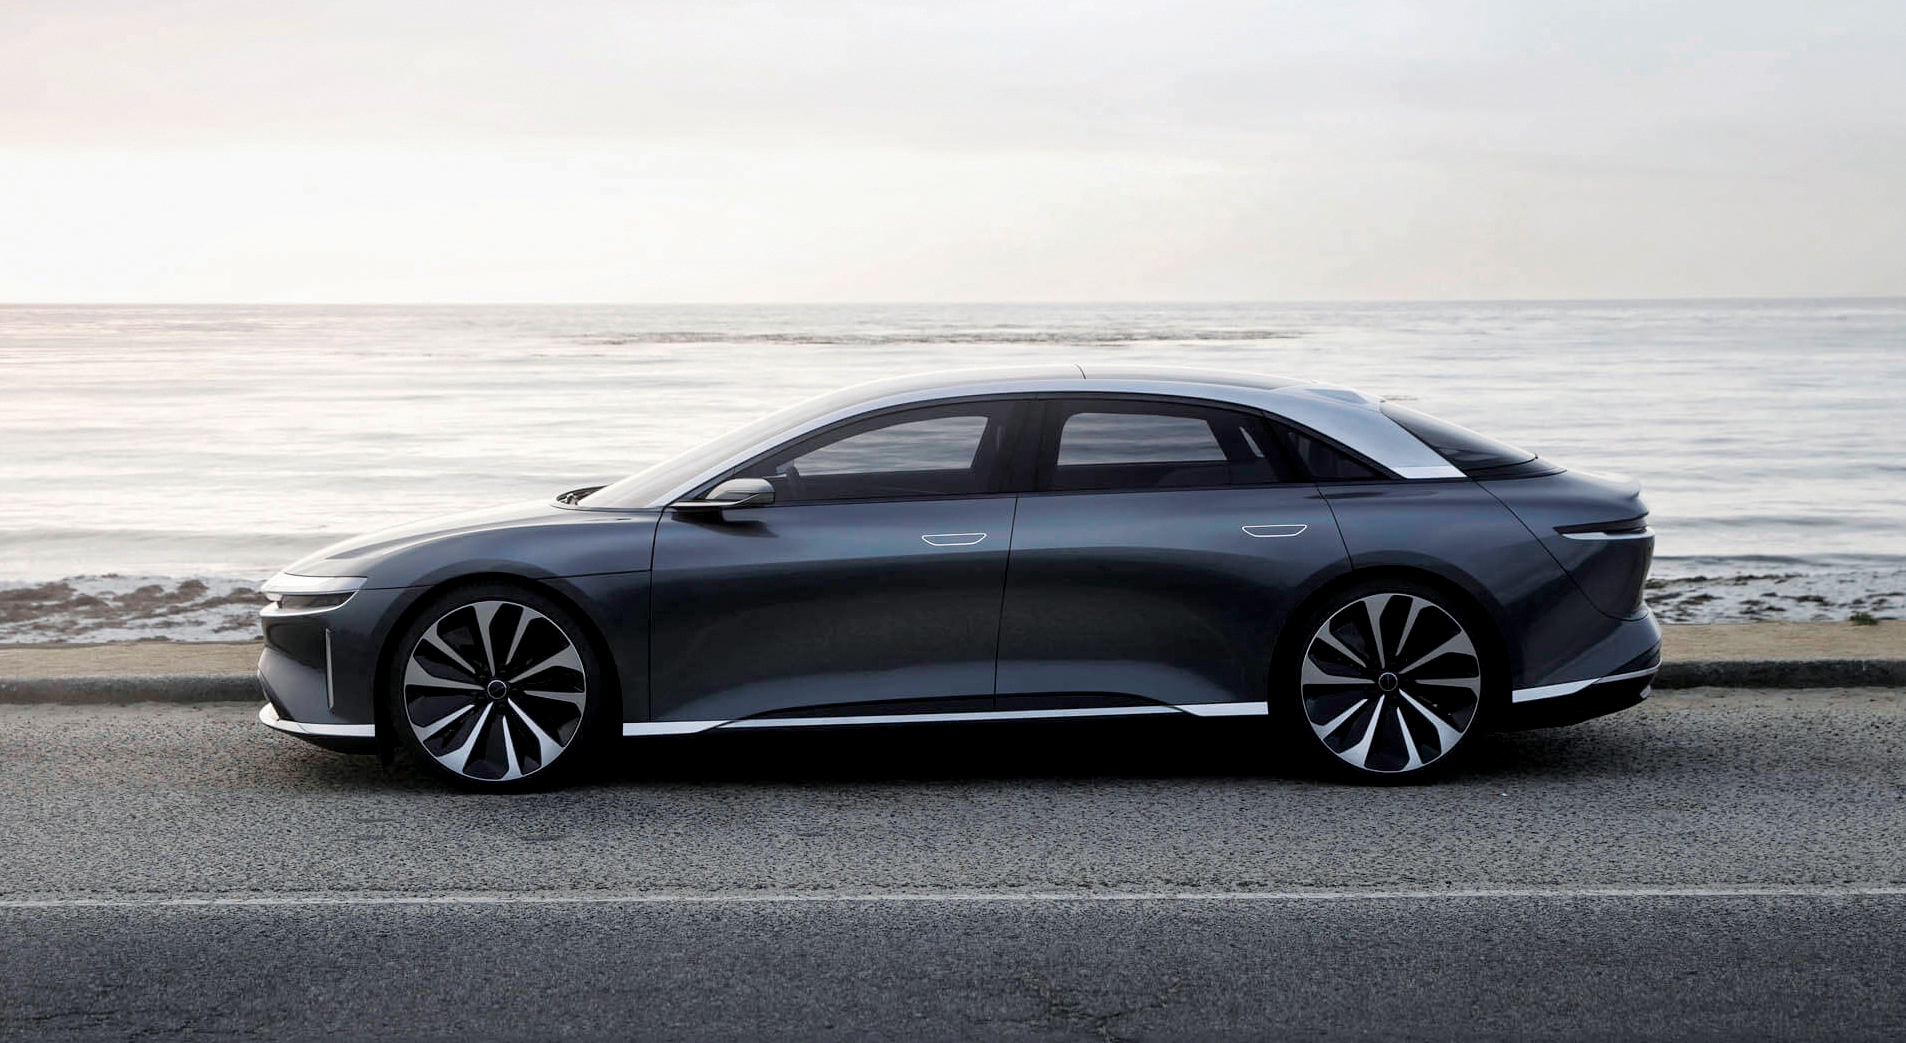 The exterior of Lucid Motors’ luxury car Lucid Air, photo courtesy of Lucid Motors